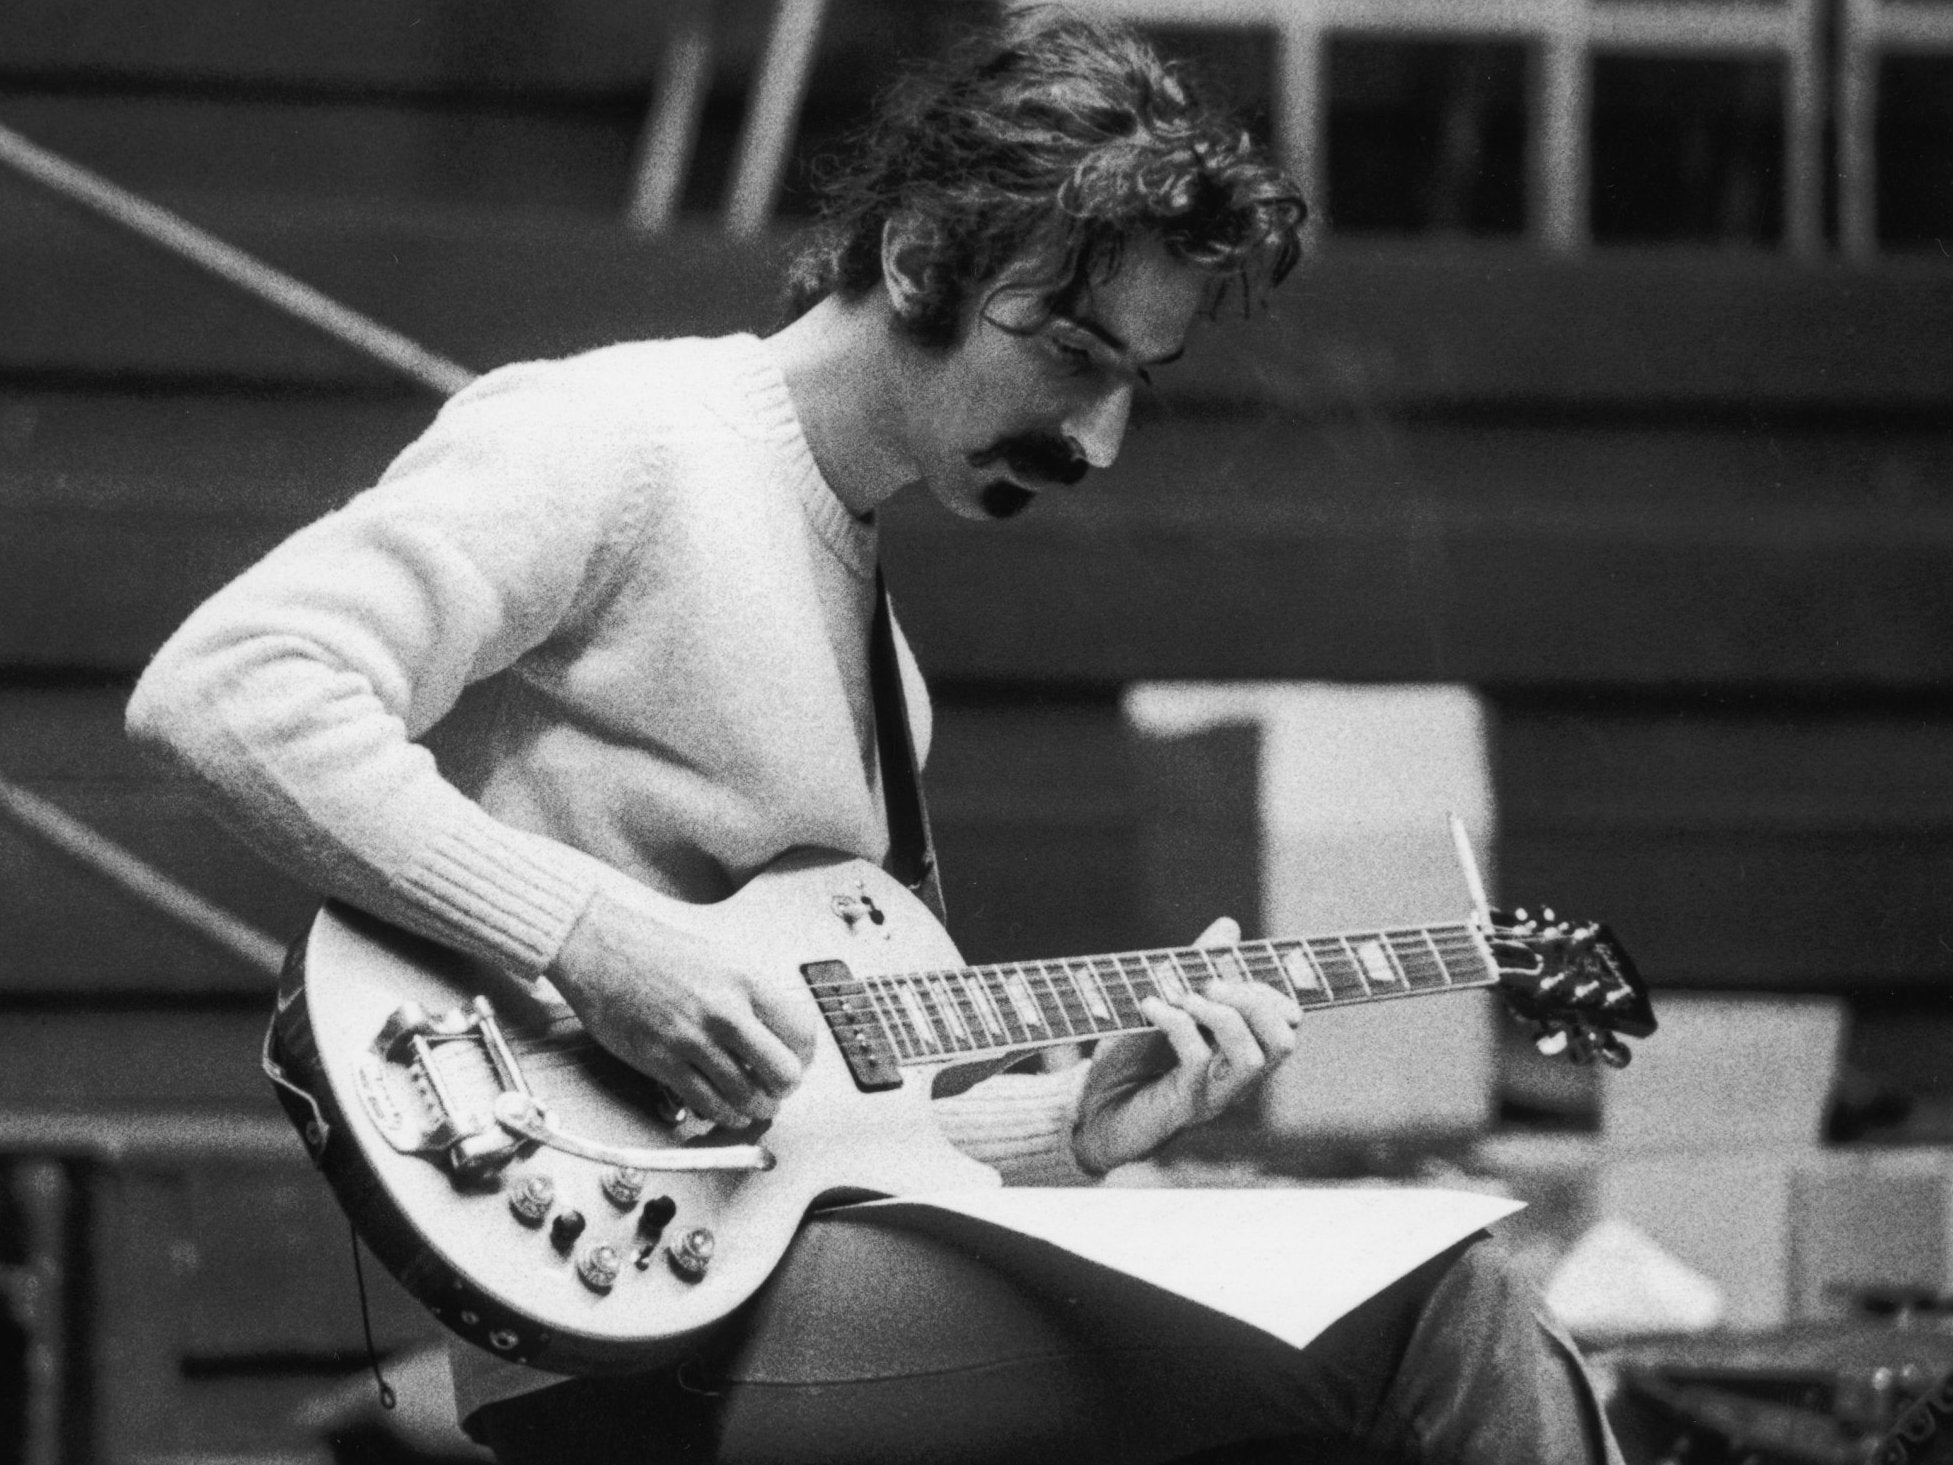 A Life in Focus: Frank Zappa, genre-defying musician who was the